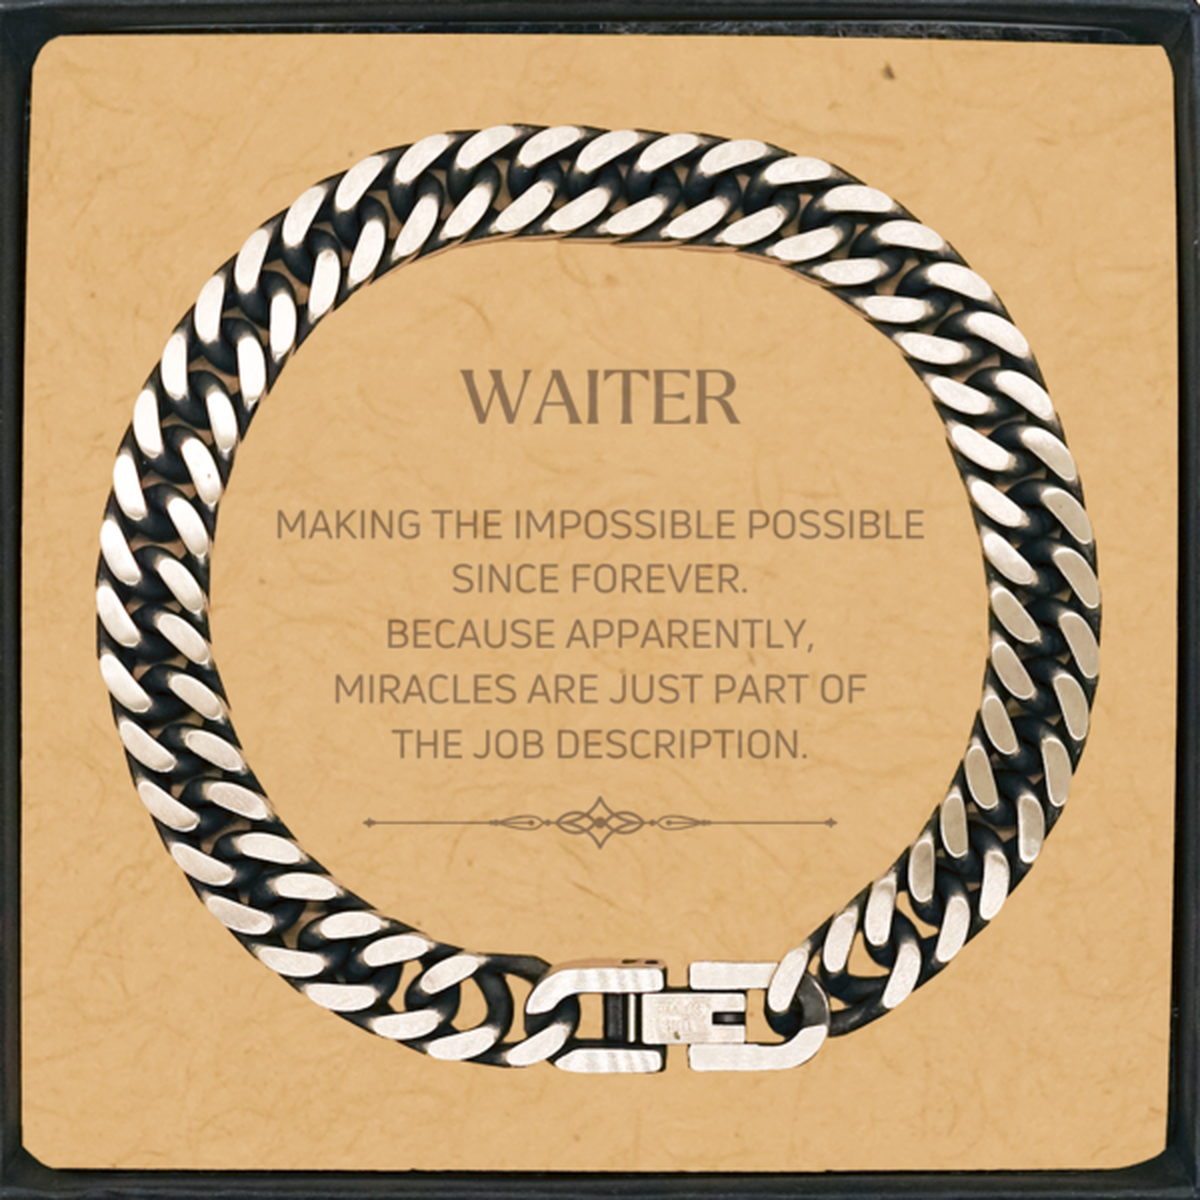 Funny Waiter Gifts, Miracles are just part of the job description, Inspirational Birthday Cuban Link Chain Bracelet For Waiter, Men, Women, Coworkers, Friends, Boss